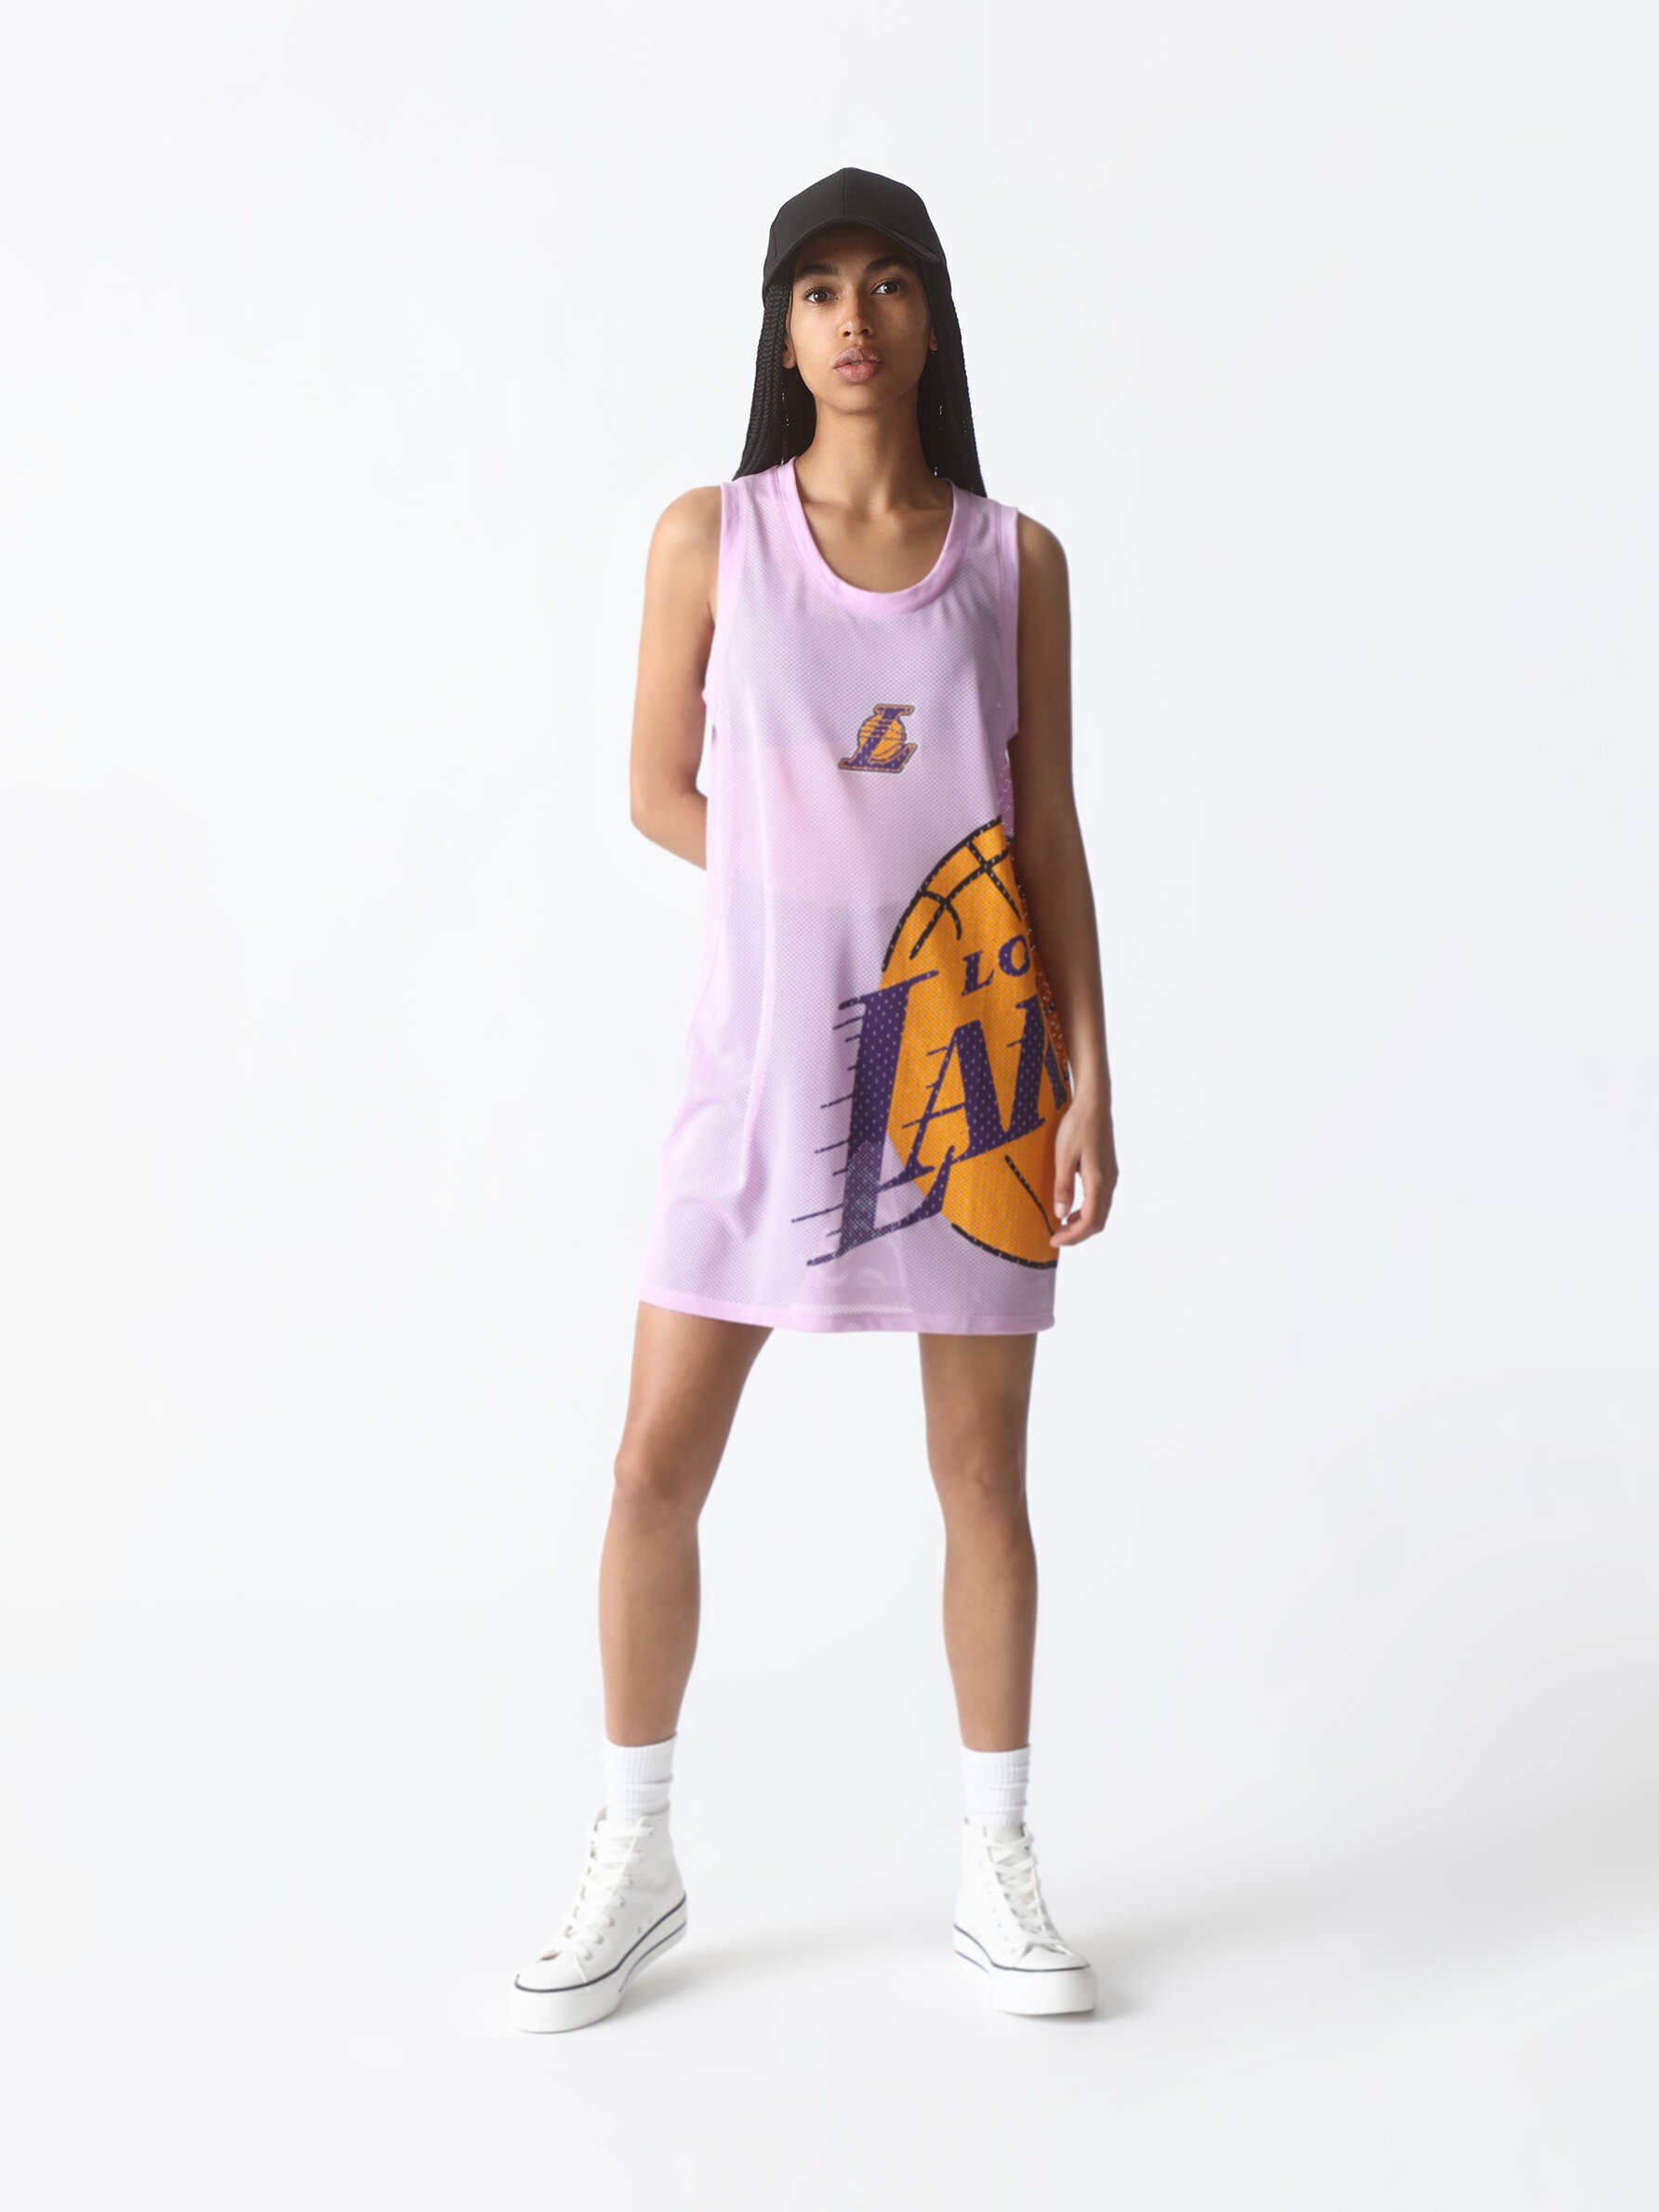 women lakers outfit